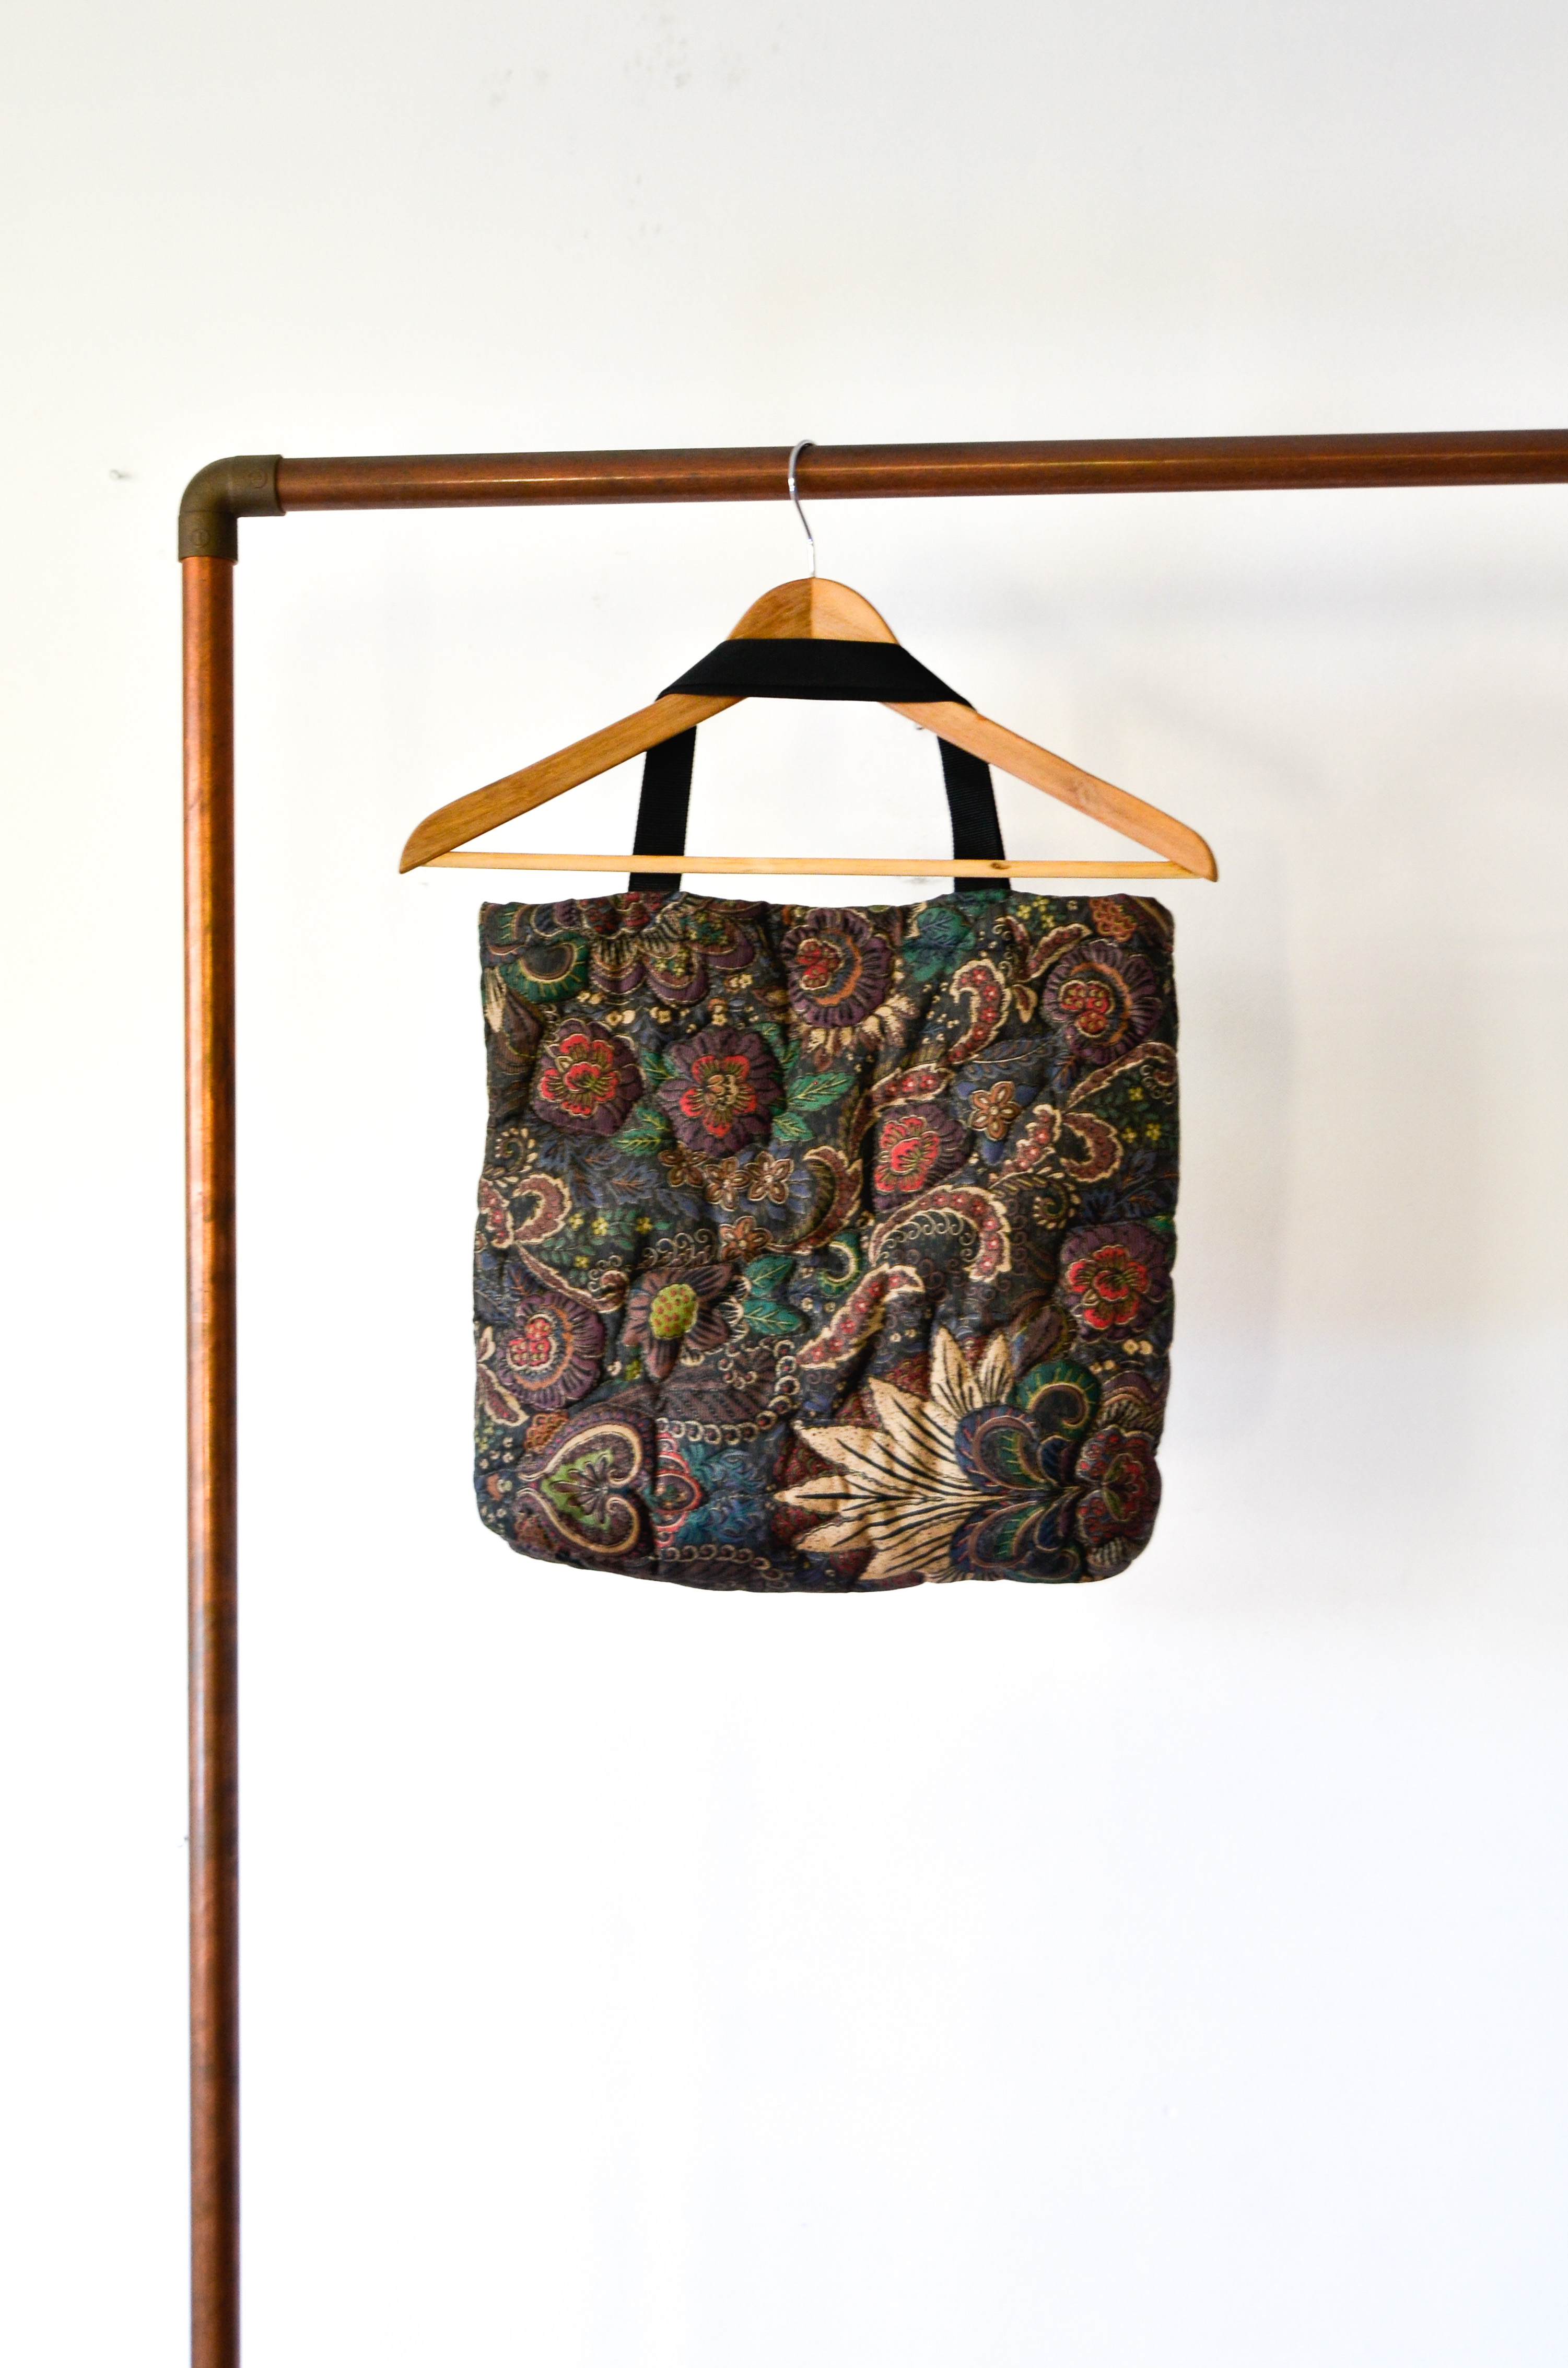 Totebag quilted paisley